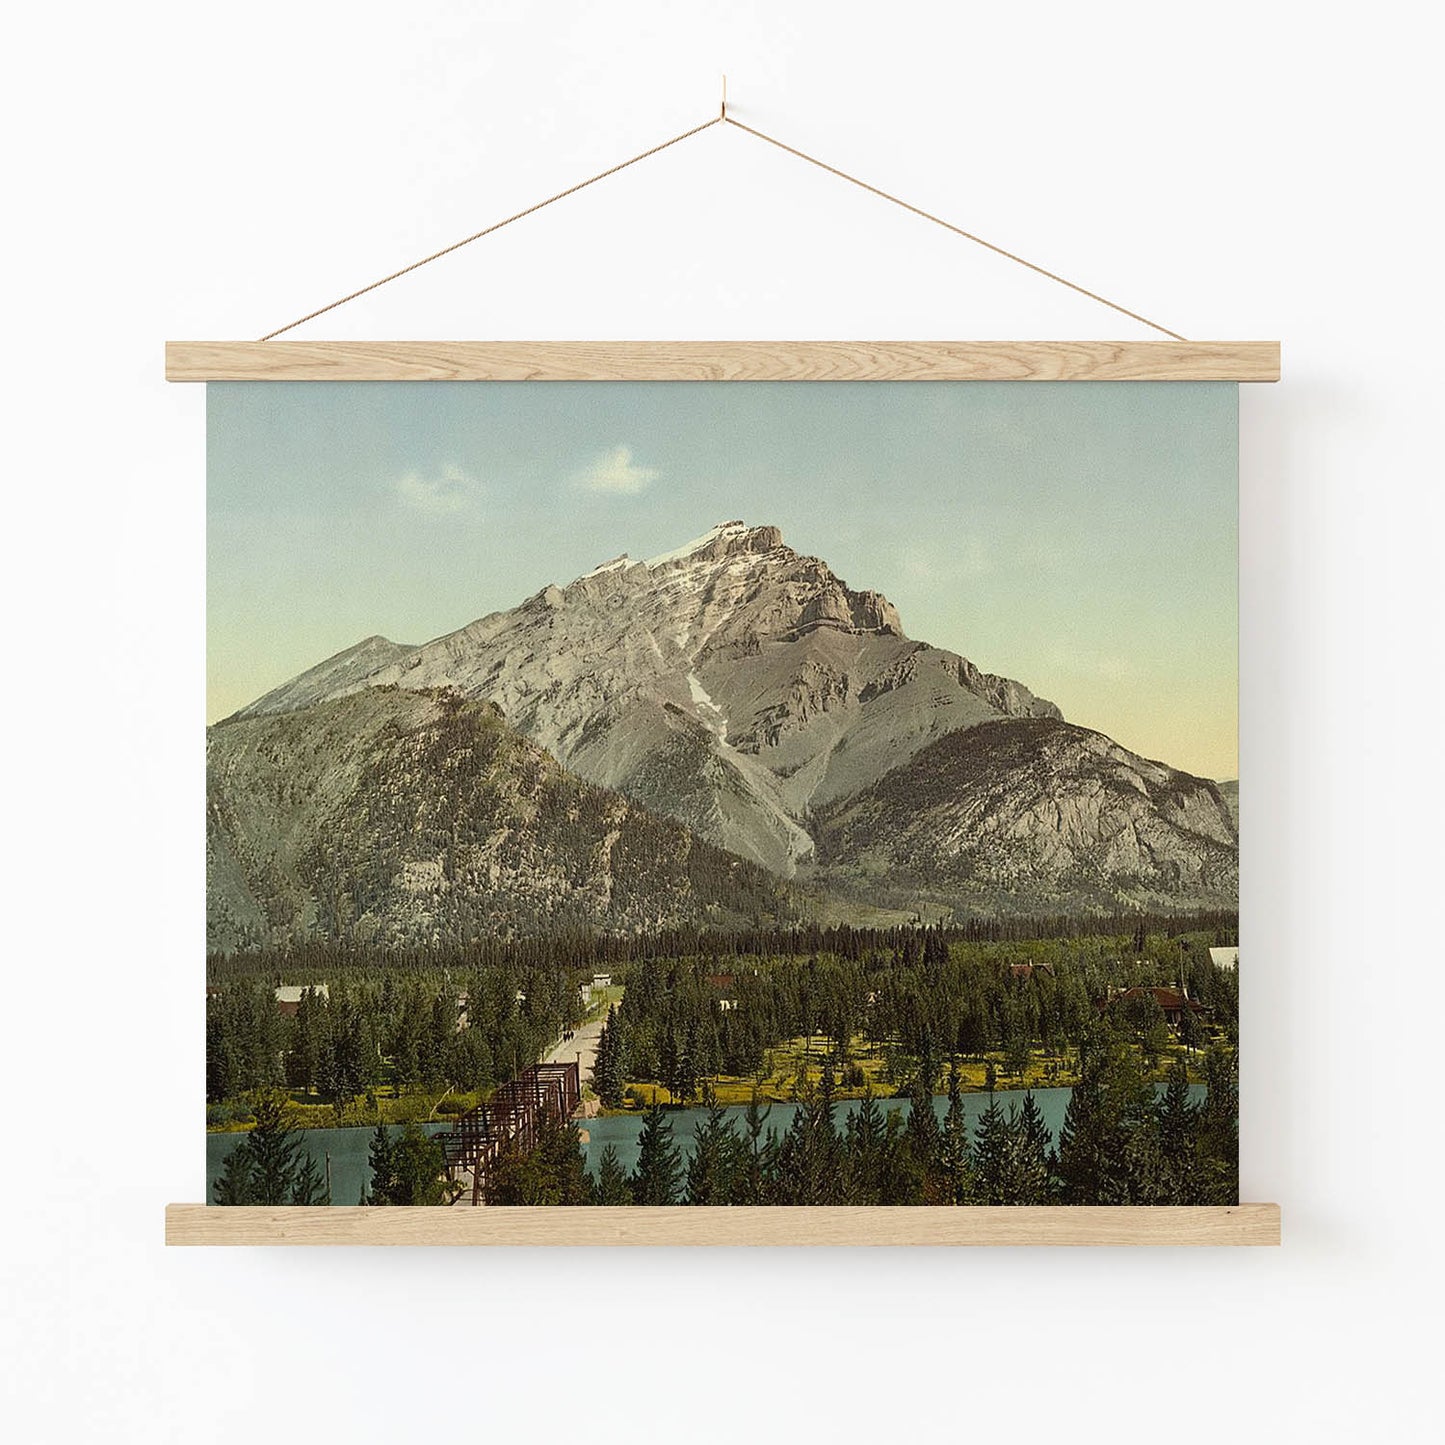 Vintage Mountains Art Print in Wood Hanger Frame on Wall